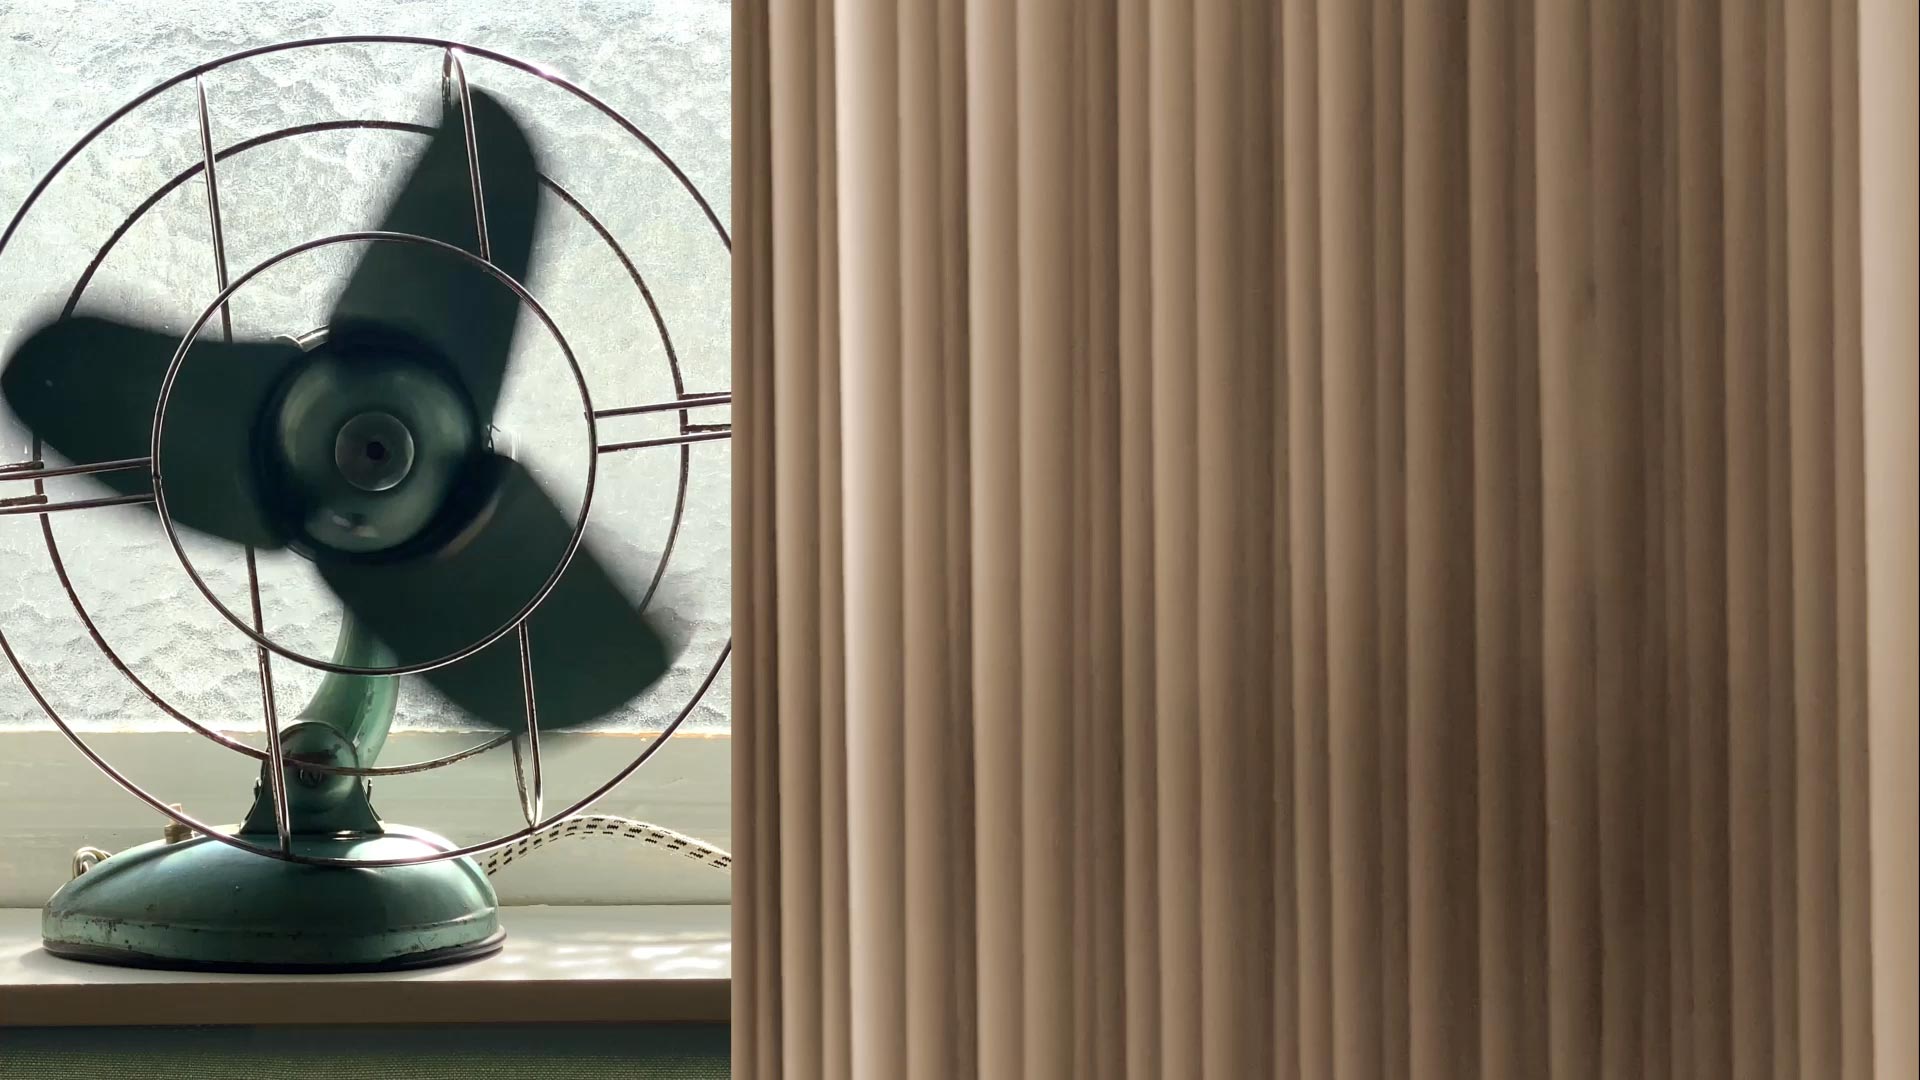 Moving image of old-fashioned table fan spinning and vertical blinds moving with breeze.